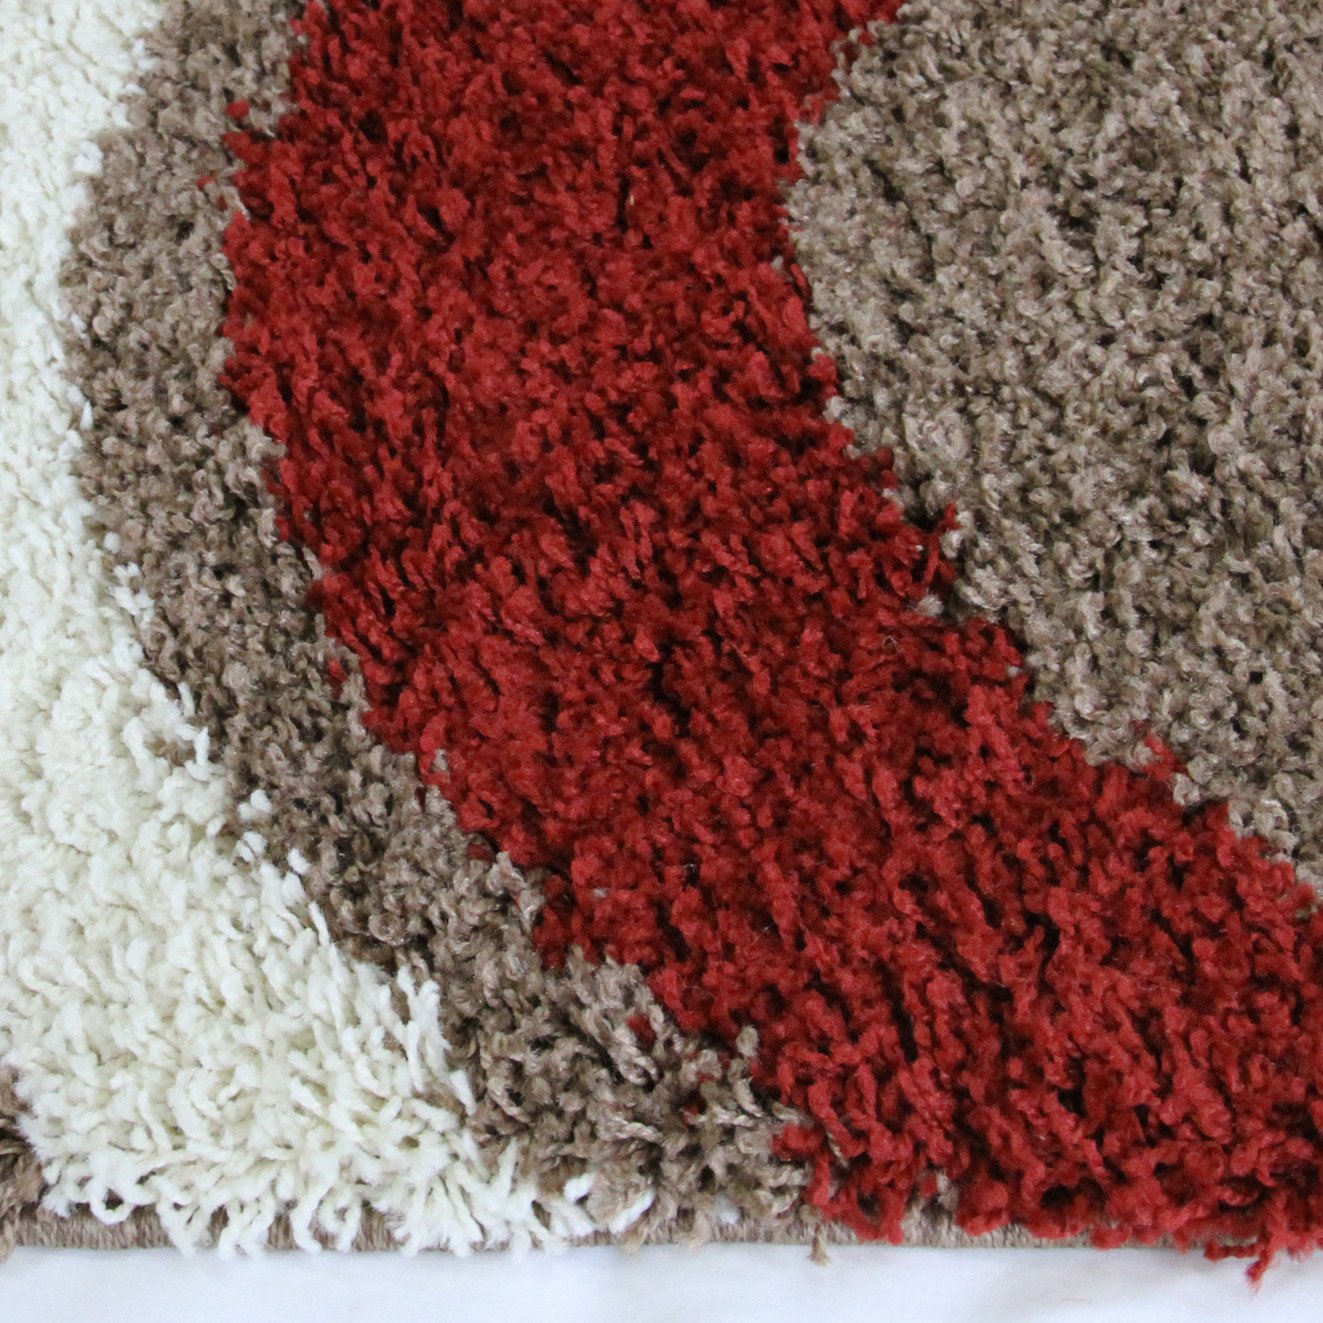 Cabana 891 Taupe-Red Rug 160x230cm-Modern Rug-Rugs 4 Less